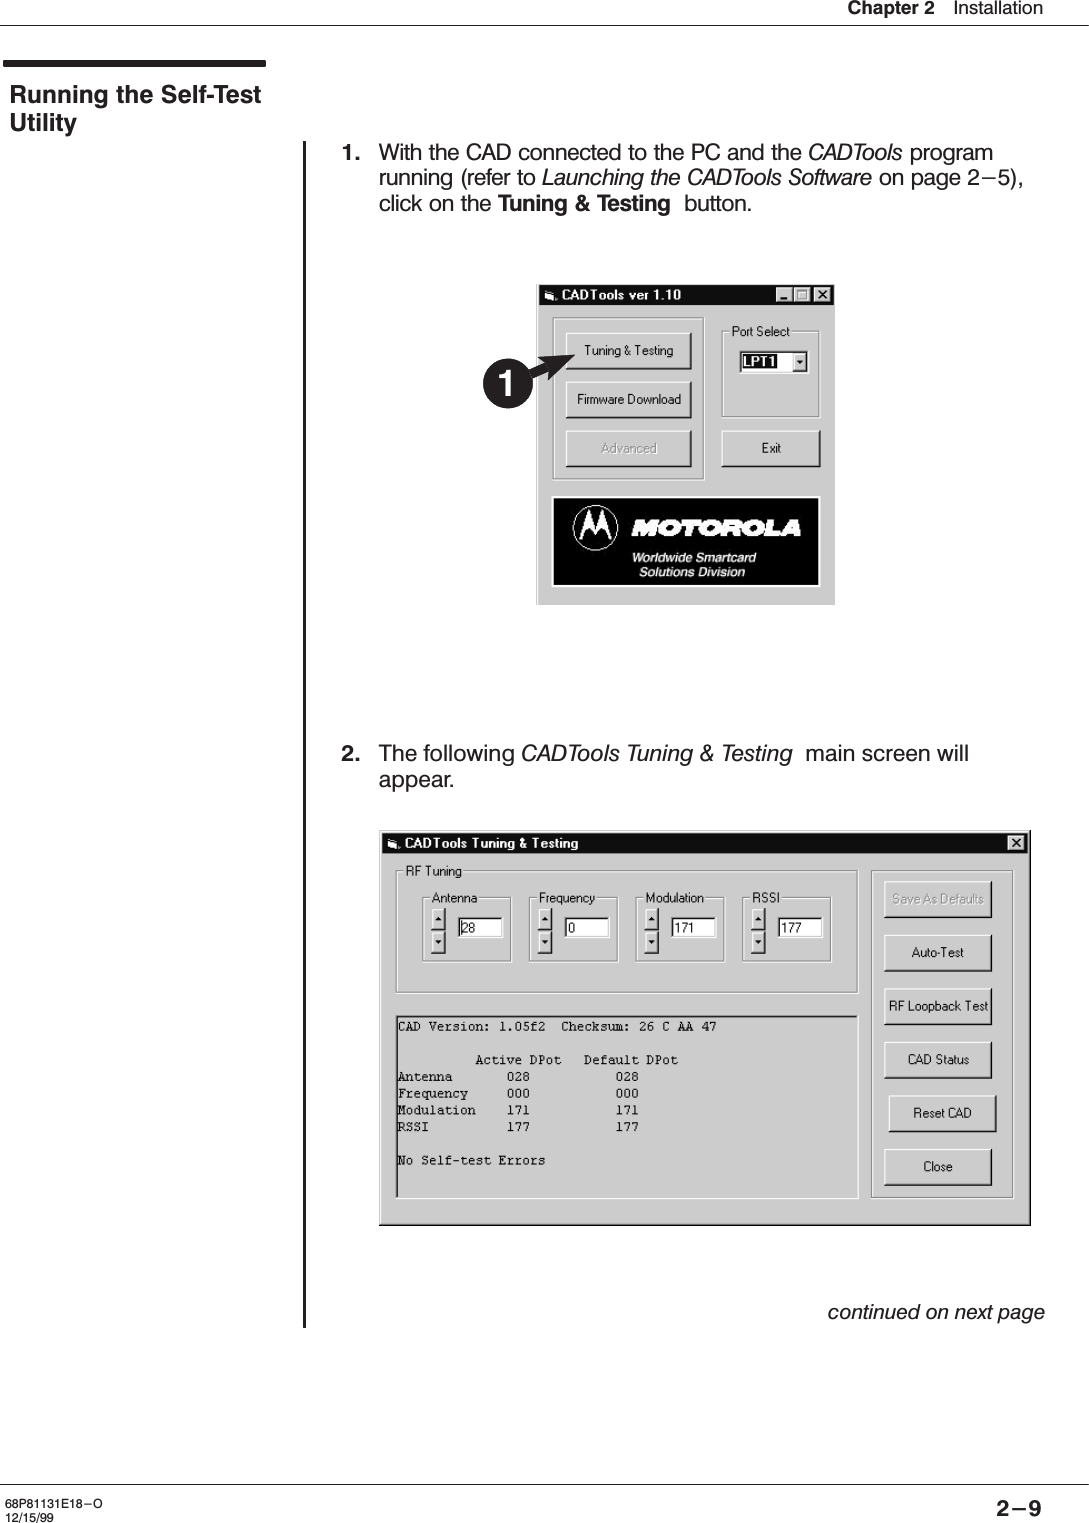 Chapter 2ąInstallation2-968P81131E18-O12/15/99Running the SelfĆTestUtility1. With the CAD connected to the PC and the CADTools programrunning (refer to Launching the CADTools Software on page 2-5),click on the Tuning &amp; Testing button.2. The following CADTools Tuning &amp; Testing main screen willappear.continued on next page1